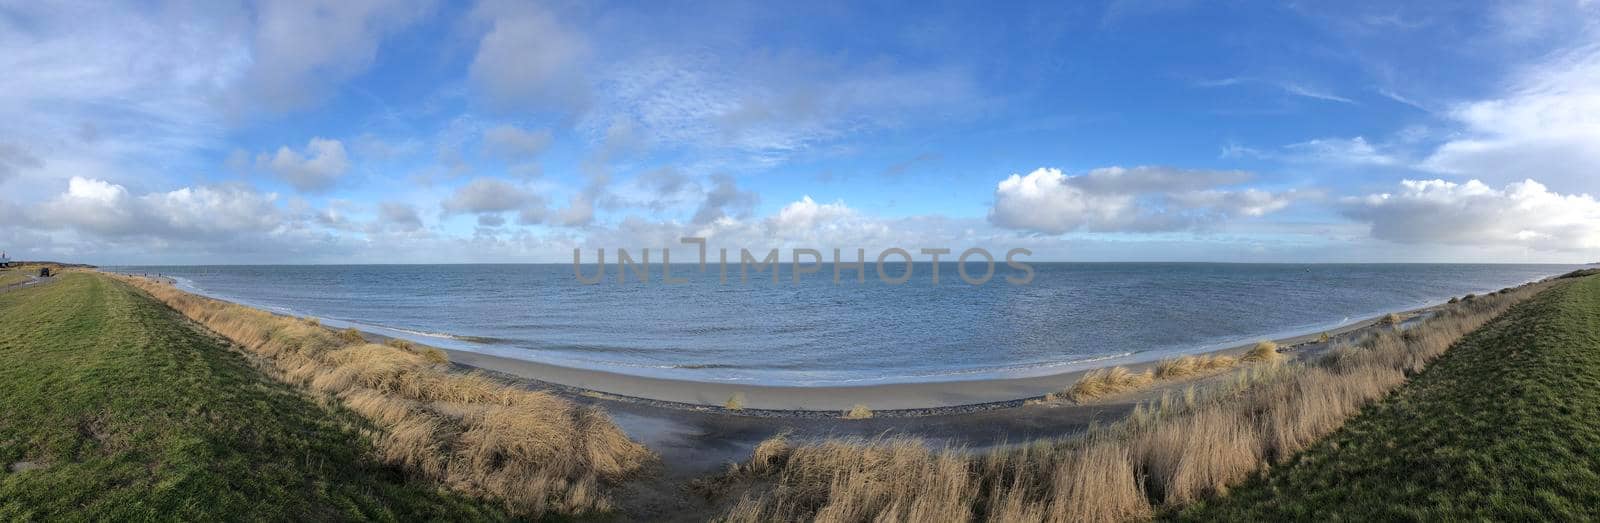 Panorama from the coast around Texel in The Netherlands